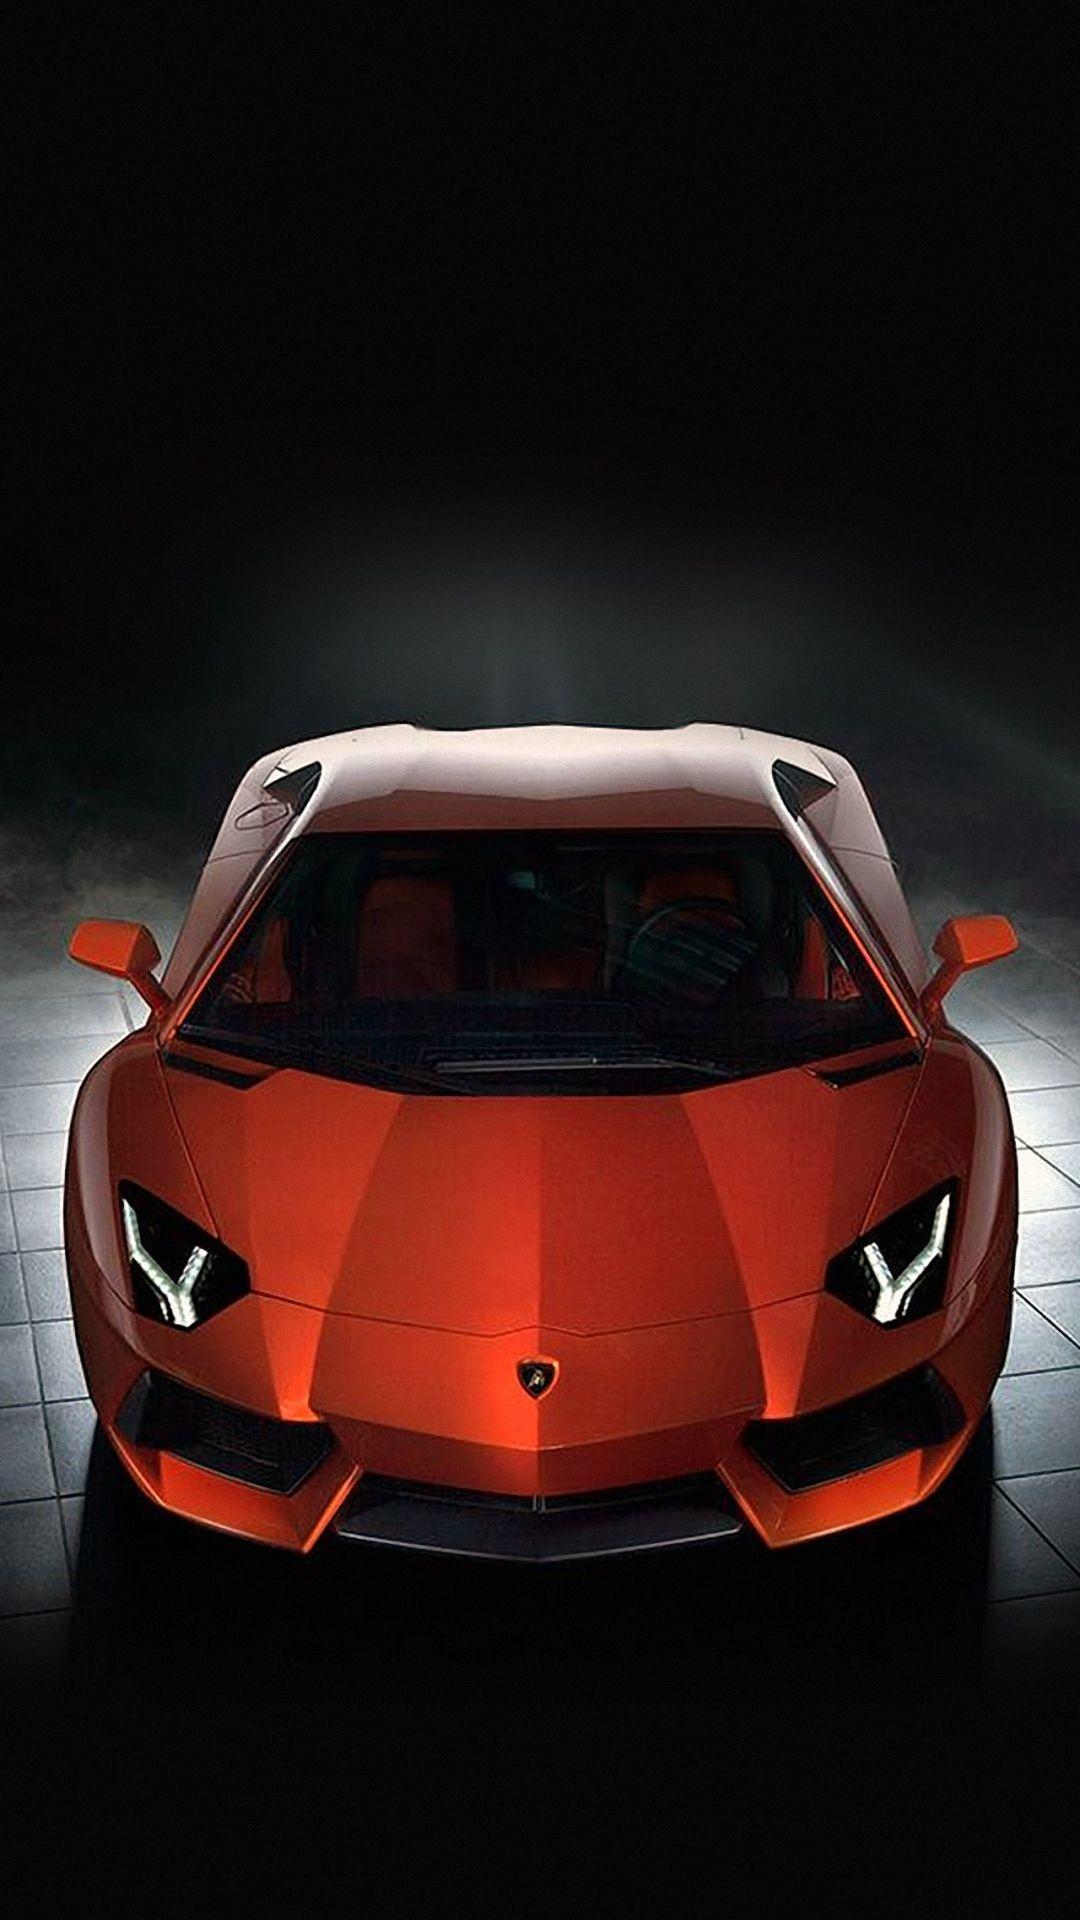 Wallpaper Car For Android